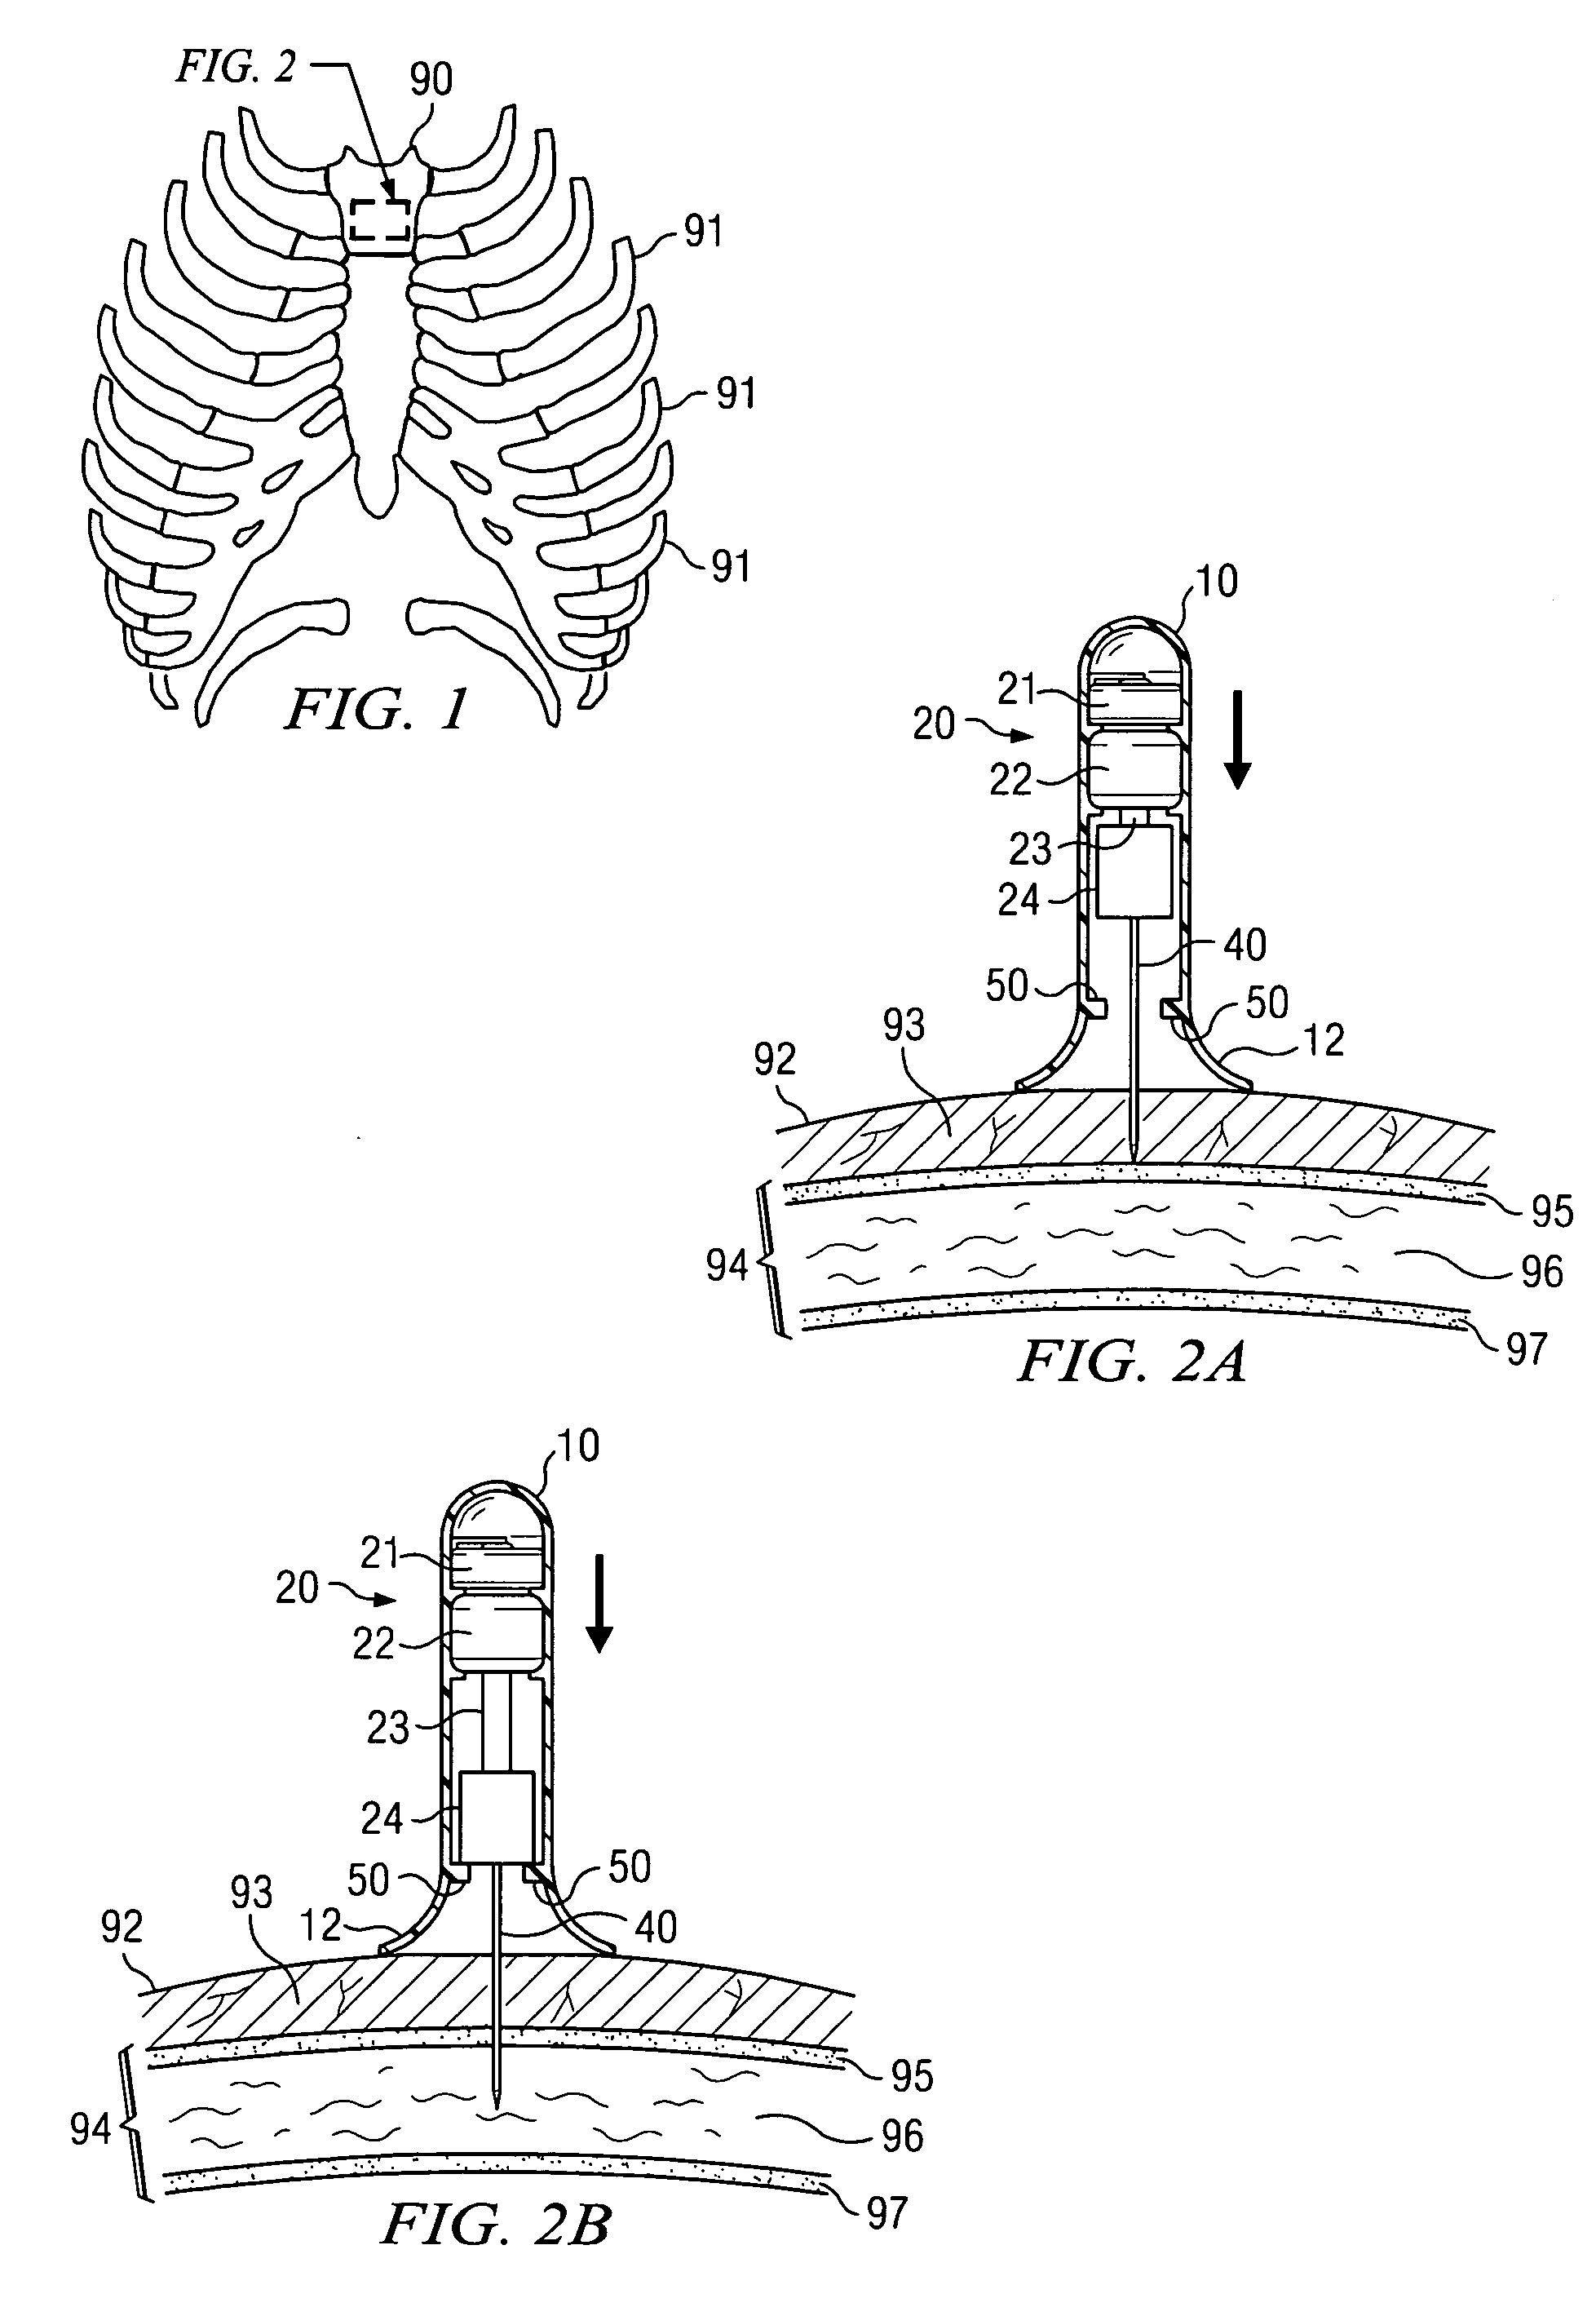 Apparatus and method for accessing the bone marrow of the sternum